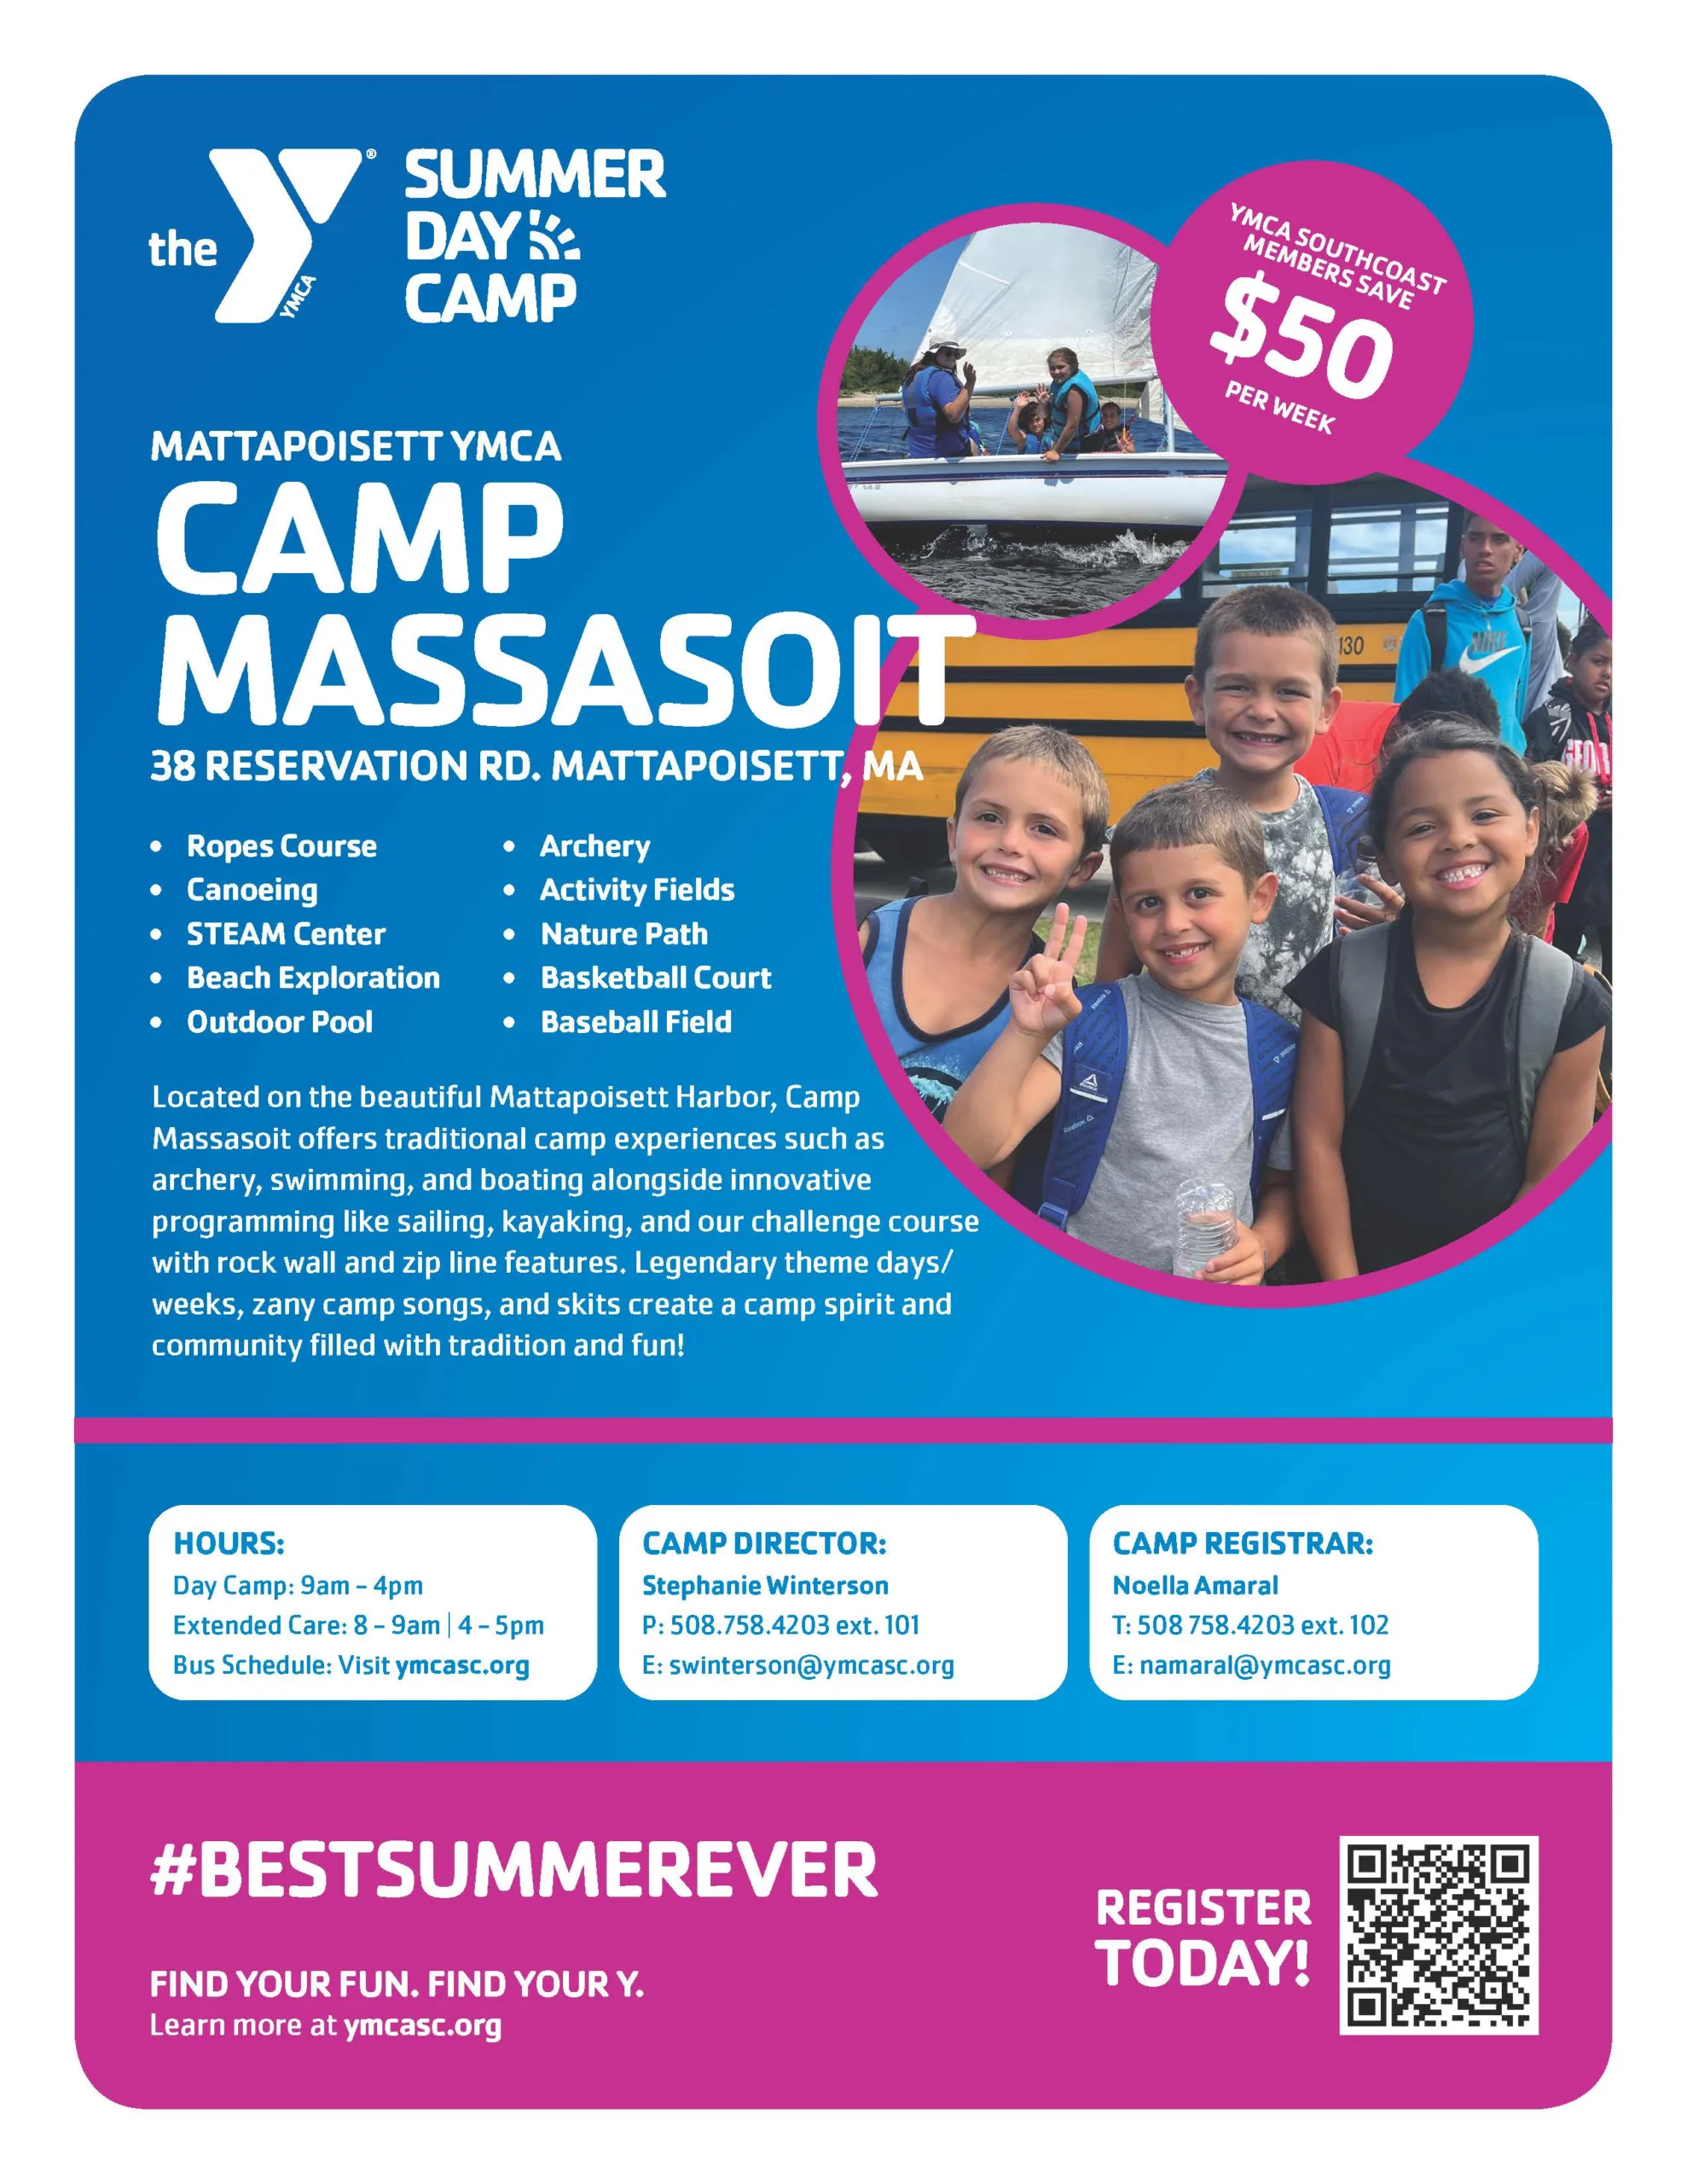 Camp Massasoit Offers Exciting Western Massachusetts Camp Experience